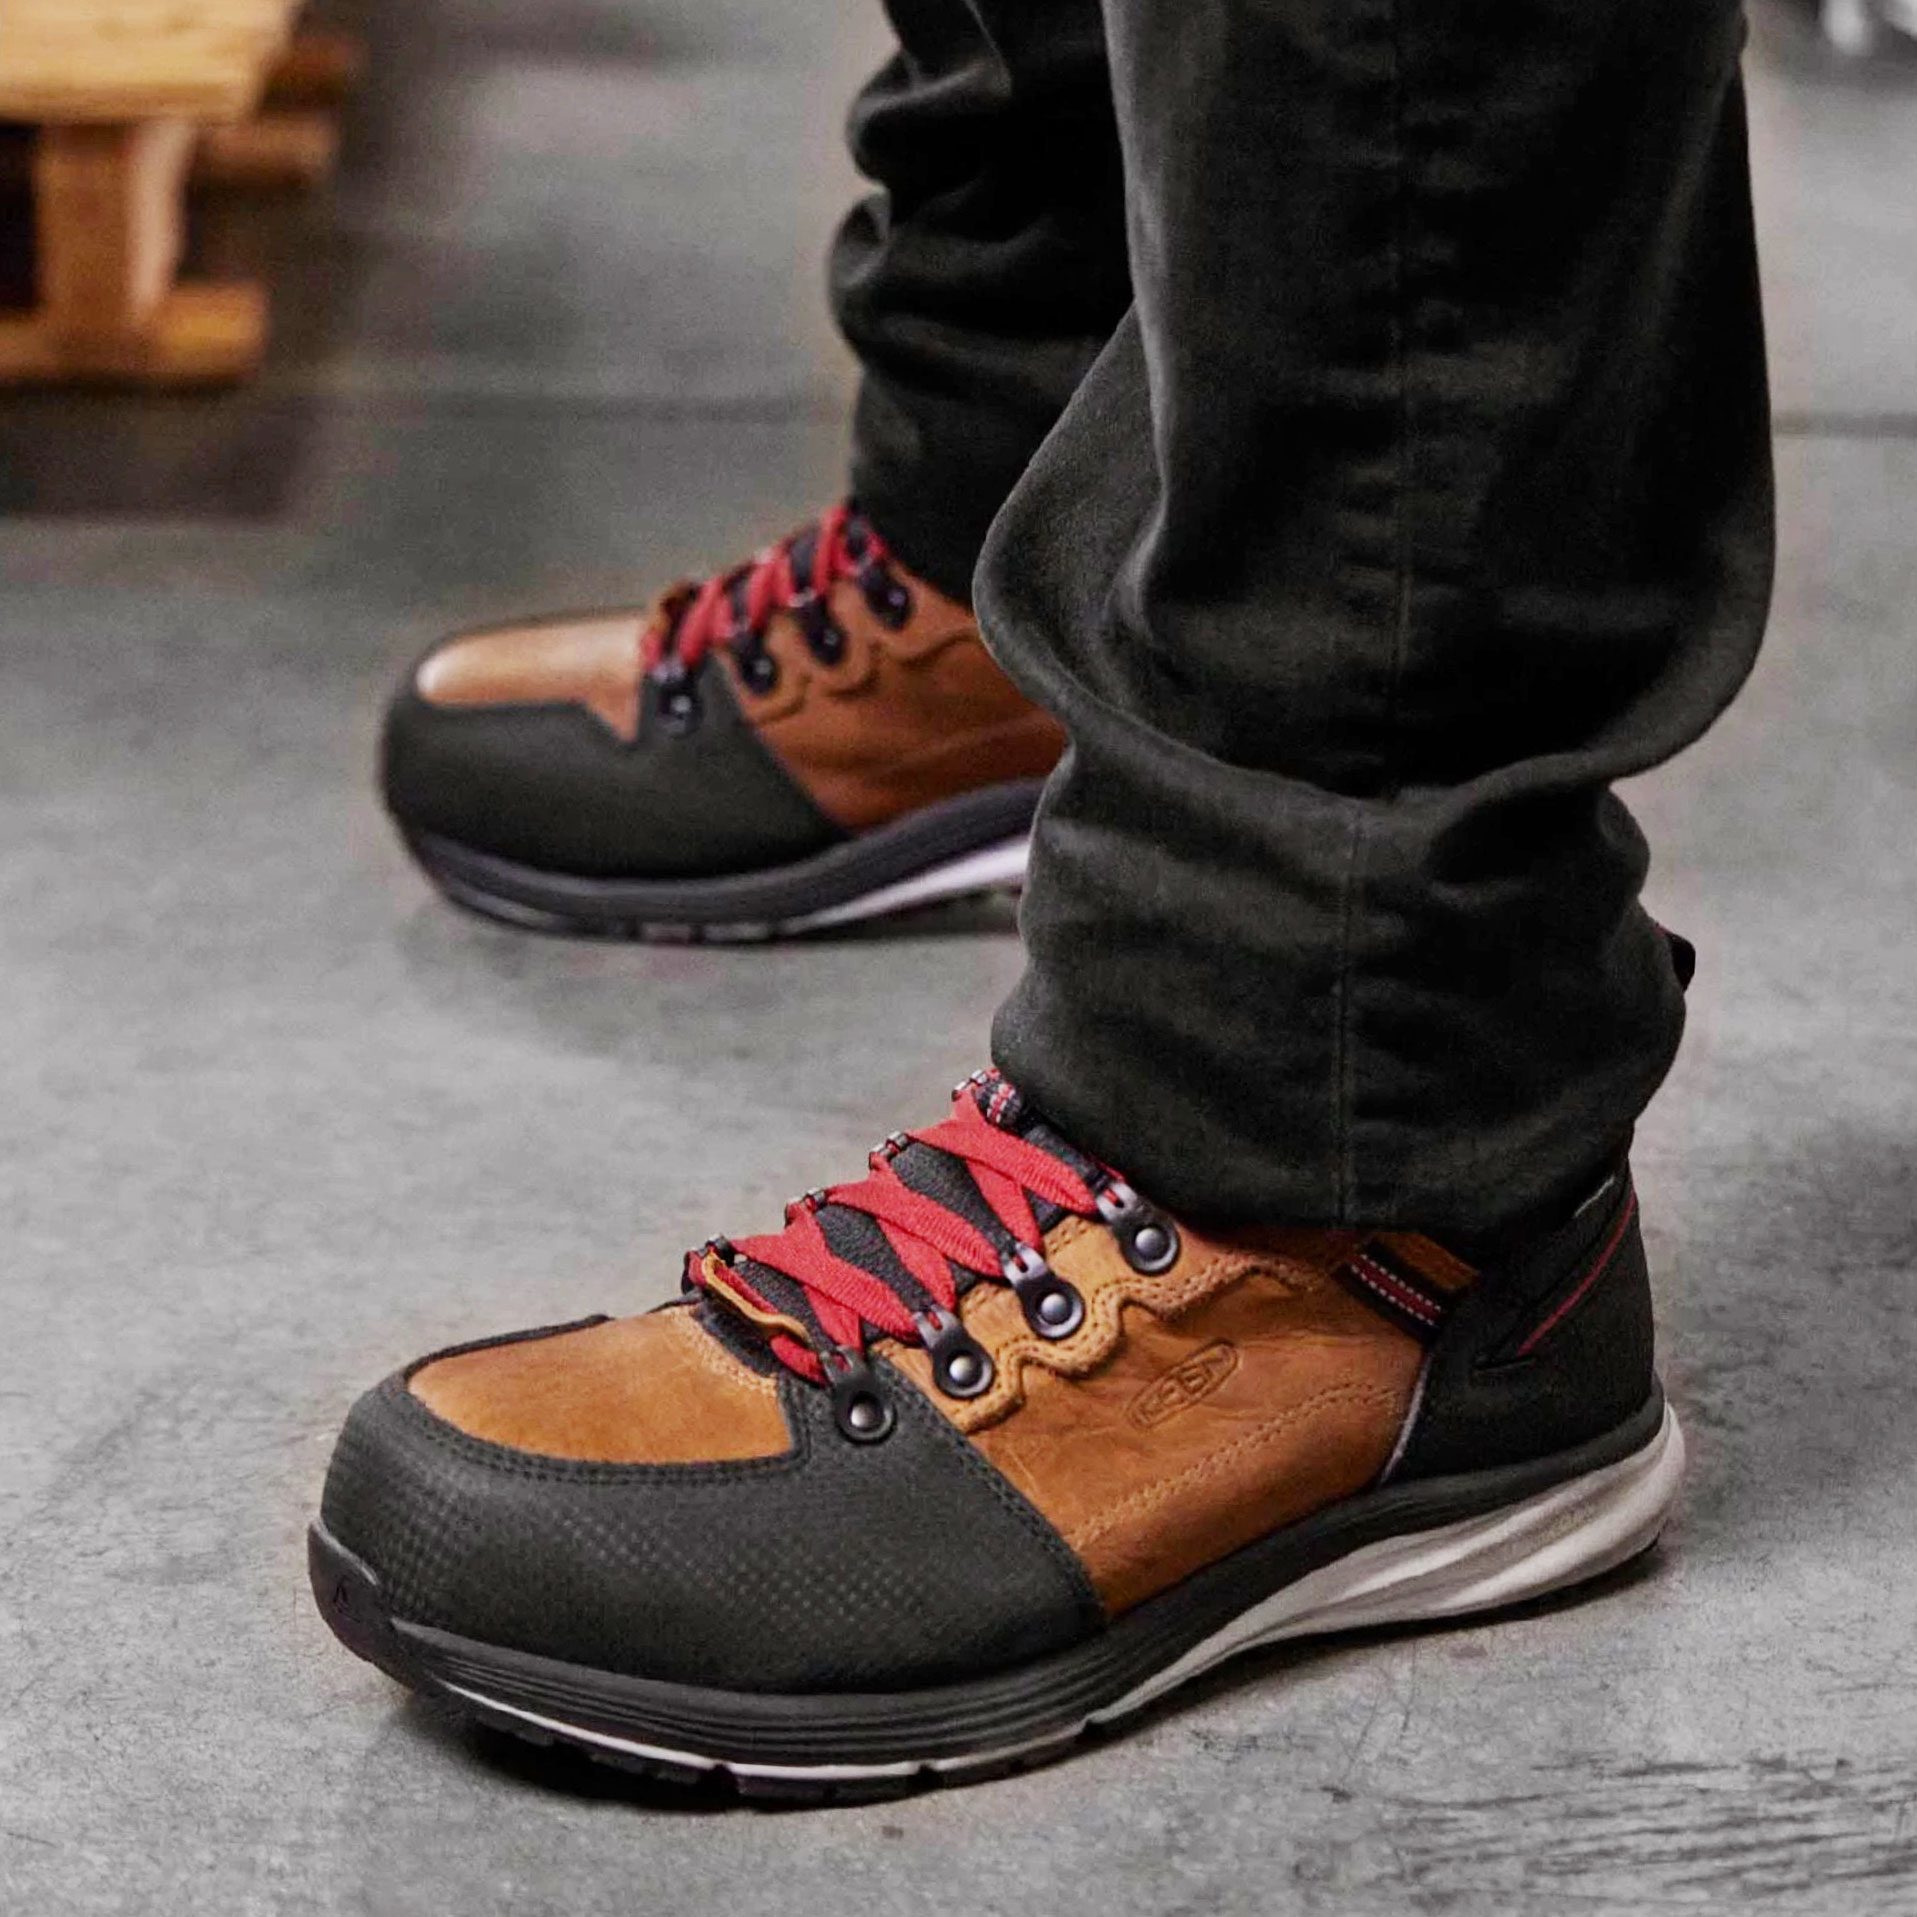 Keen Utility Red Hook Work Boots Review - Best Waterproof Work Boot (We Approve!)